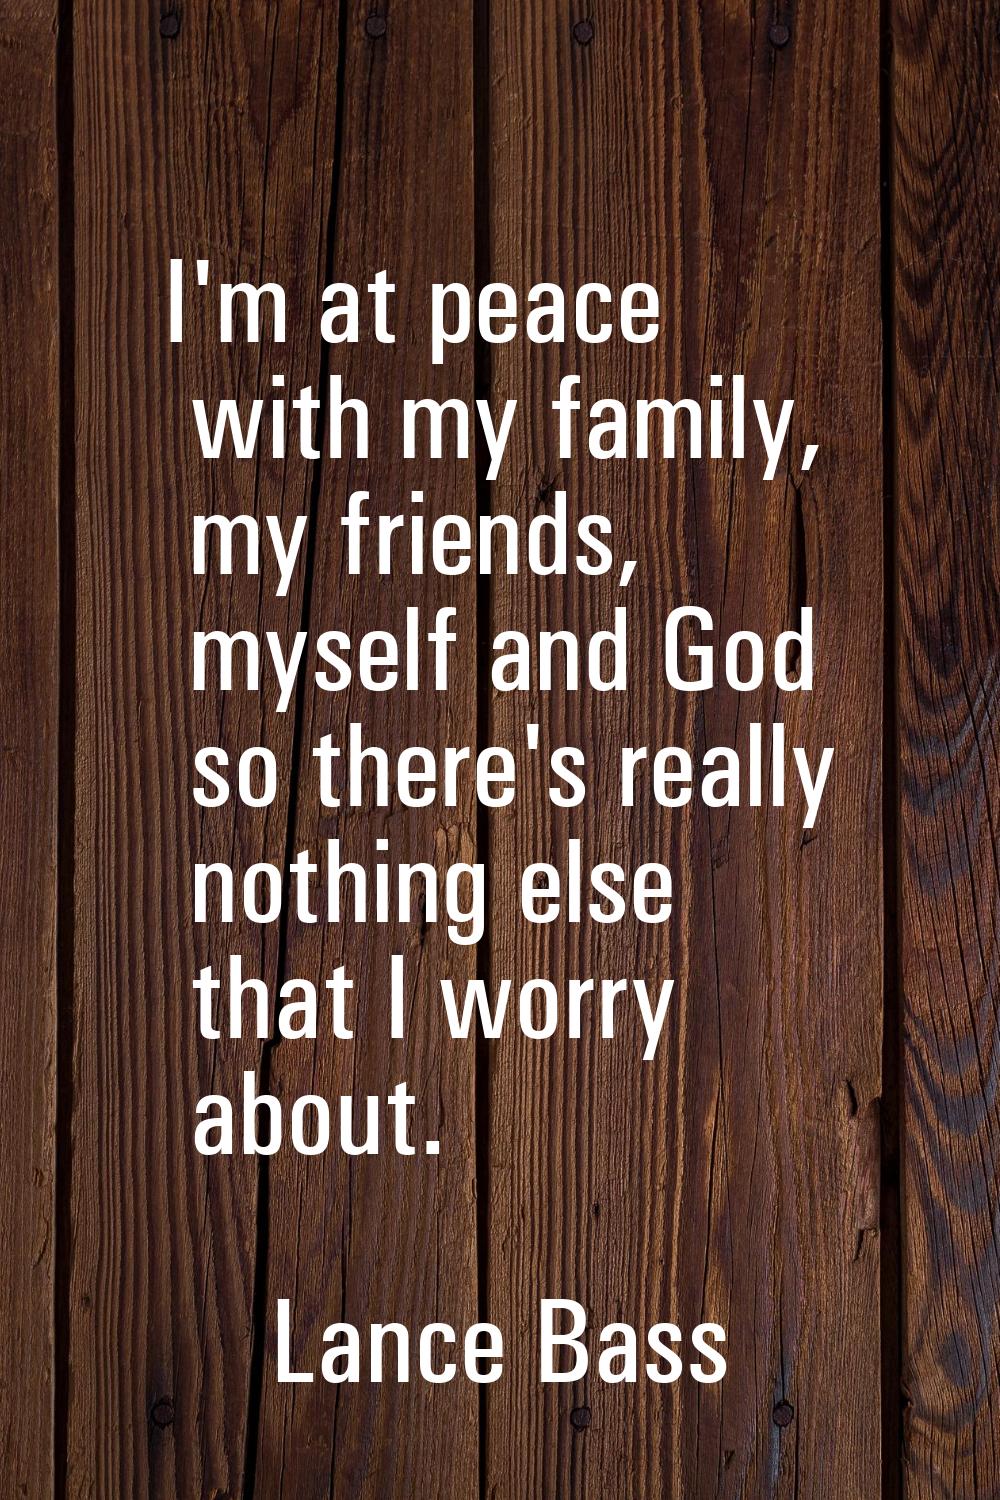 I'm at peace with my family, my friends, myself and God so there's really nothing else that I worry